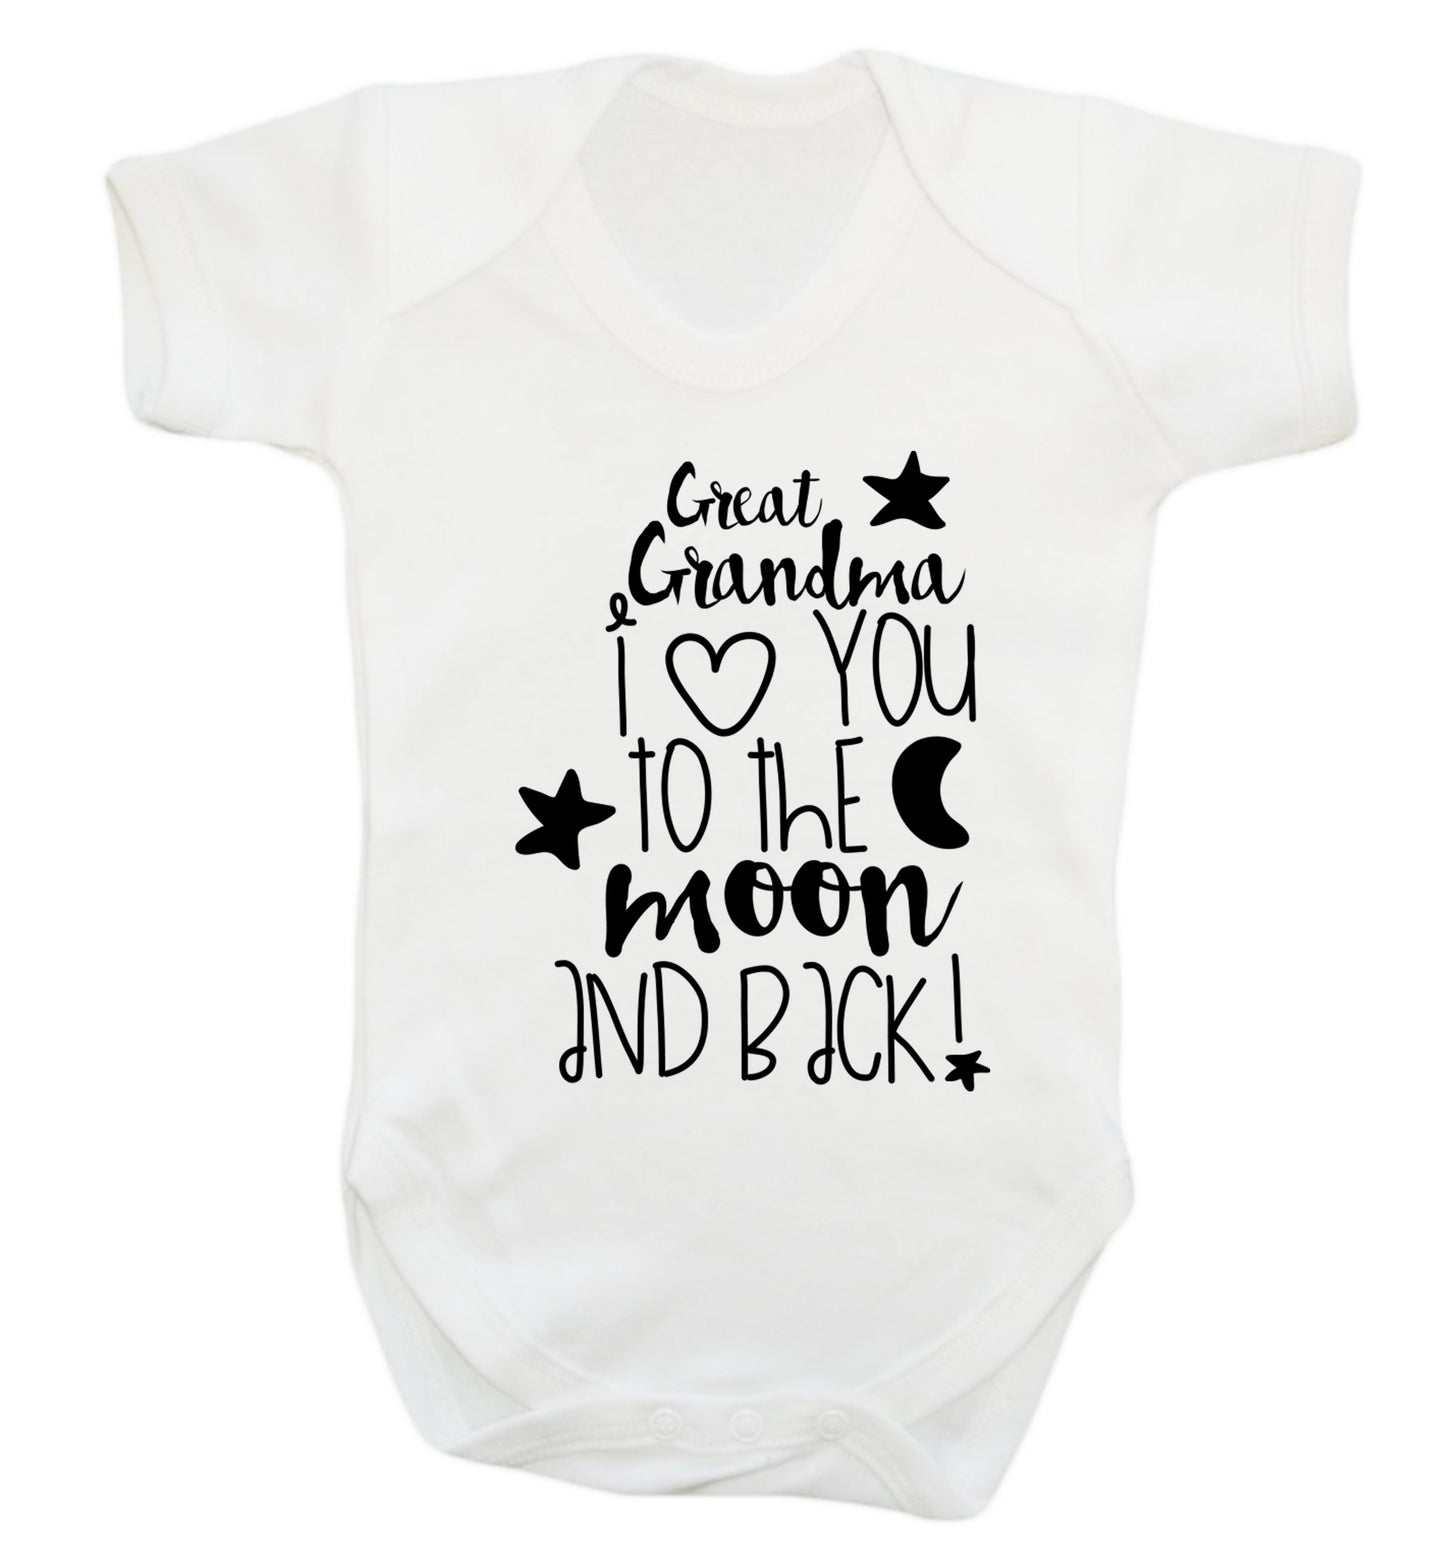 Great Grandma I love you to the moon and back Baby Vest white 18-24 months